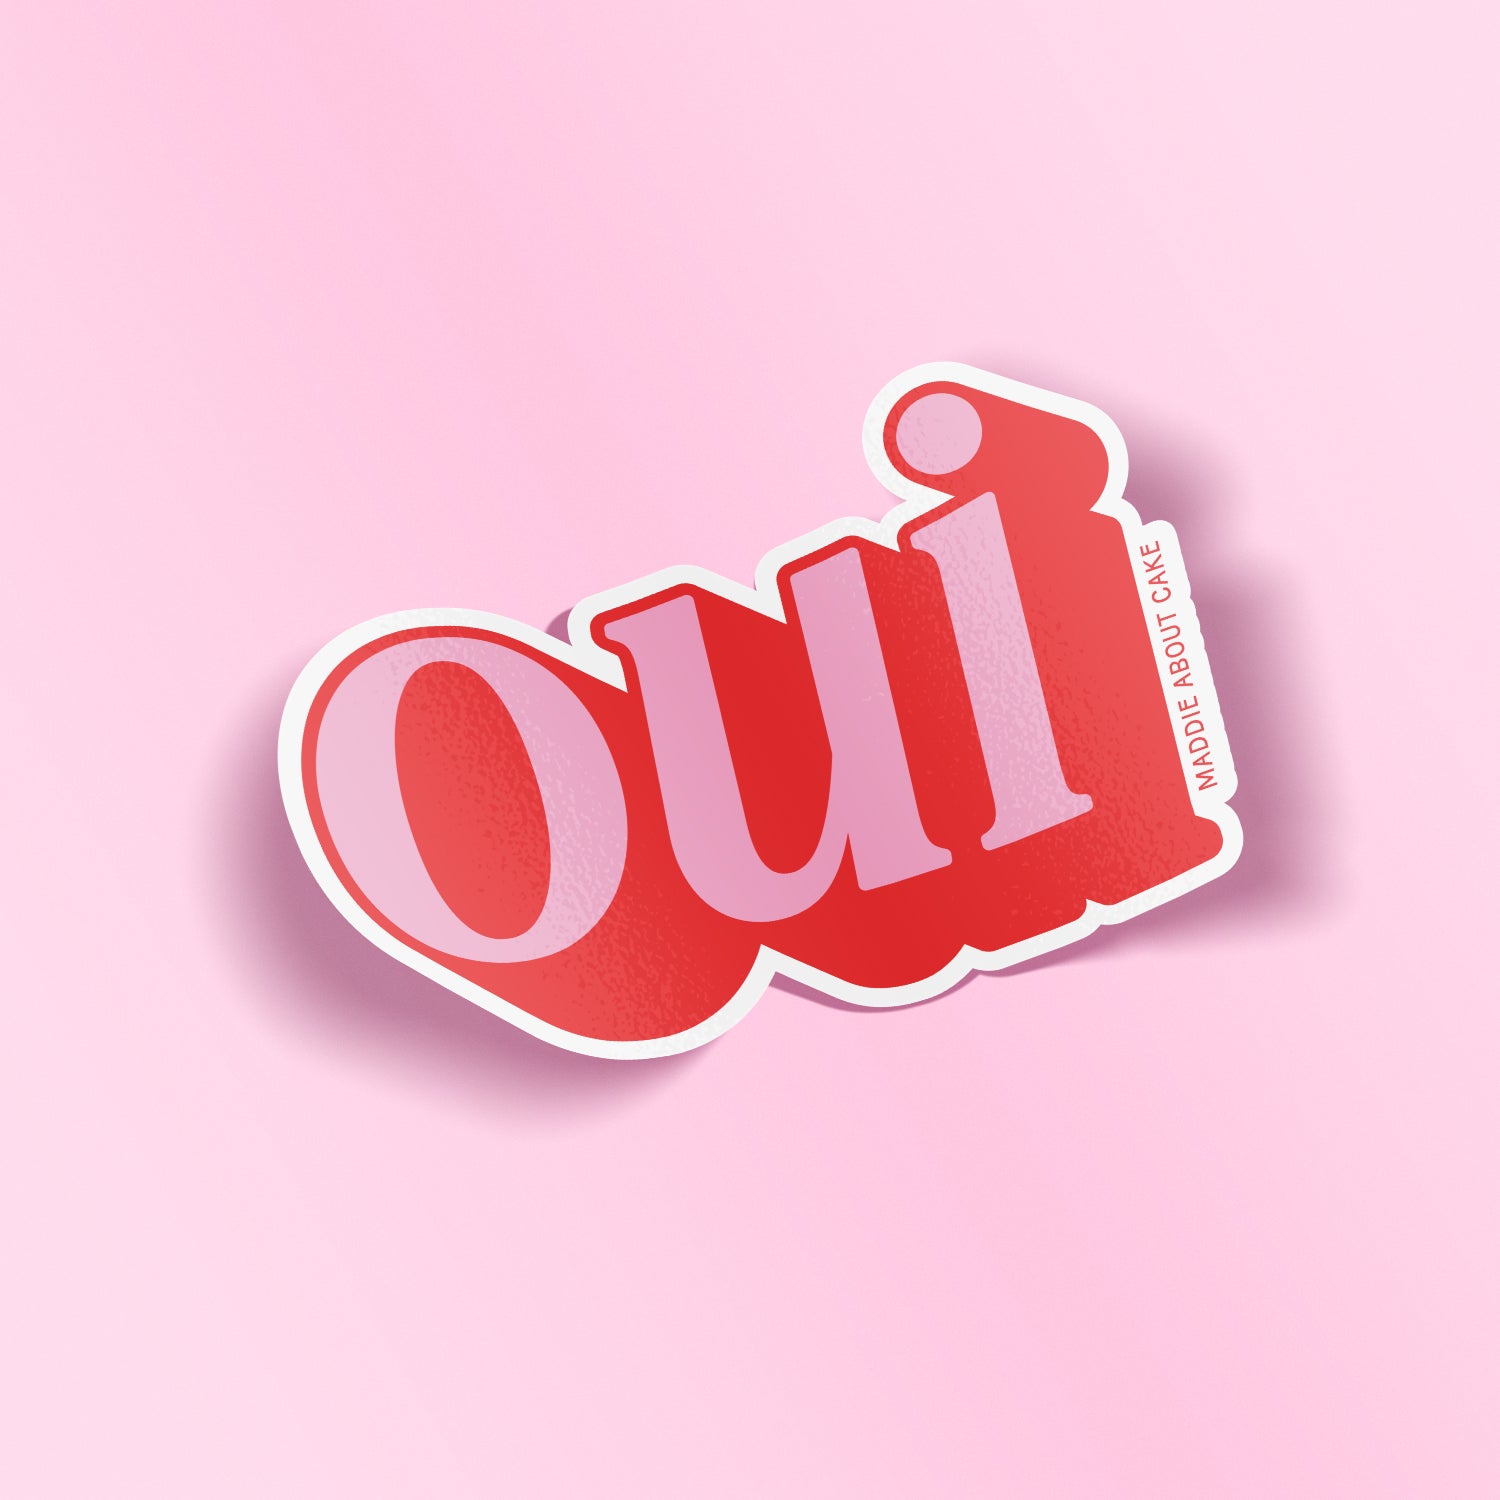 Pink and red decorative sticker that says "oui" in an italicized serif font. The text is pink with red shadow so it appears 3D. The sticker is laying on a light pink background.